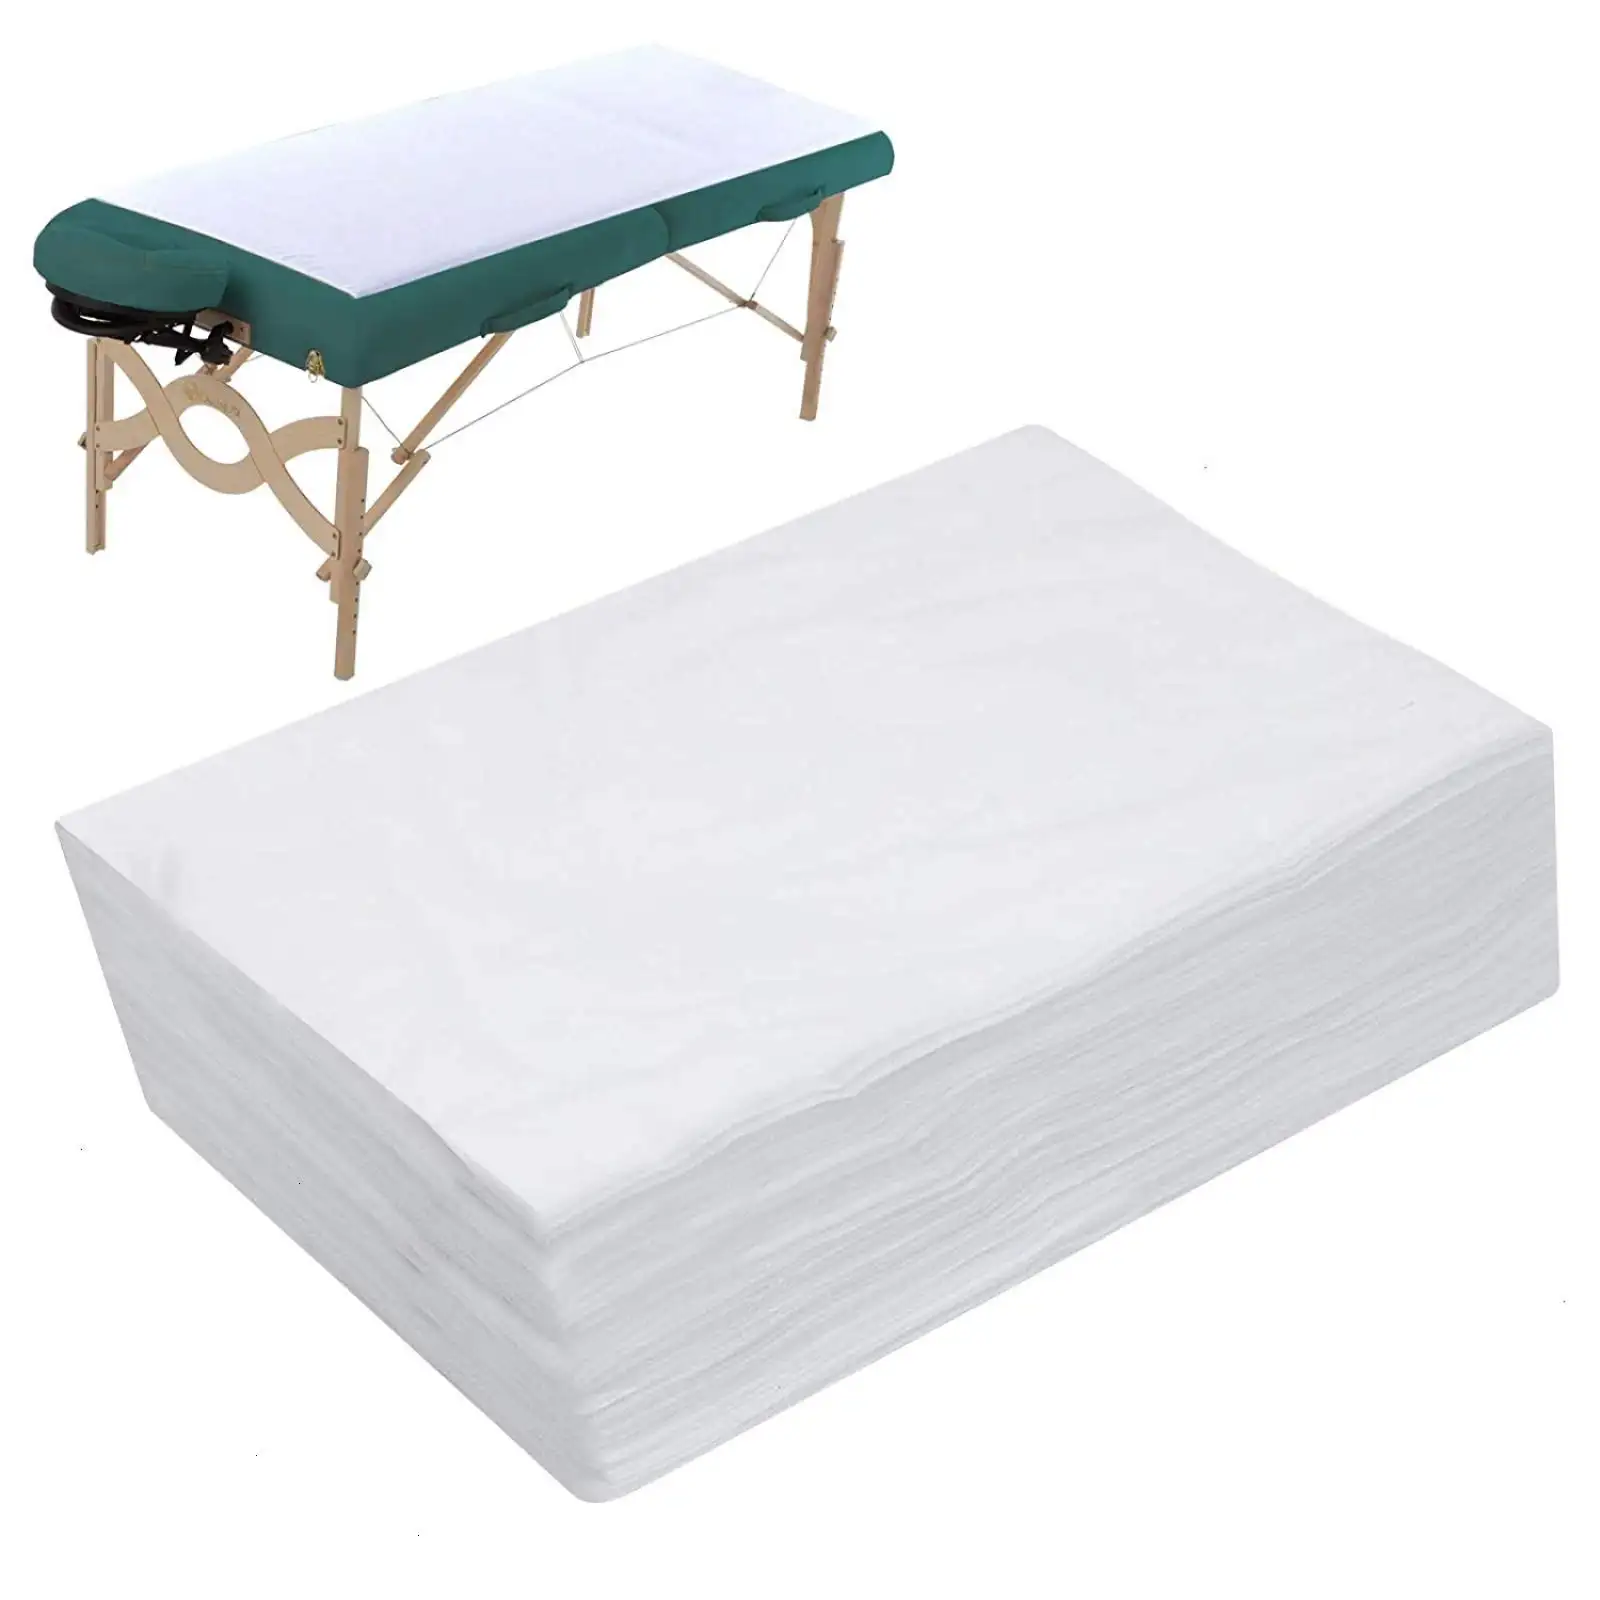 Disposable Bed Sheets Non-woven Fabric Lash Bed Cover White Spa Bed Sheets for Esthetician Waxing